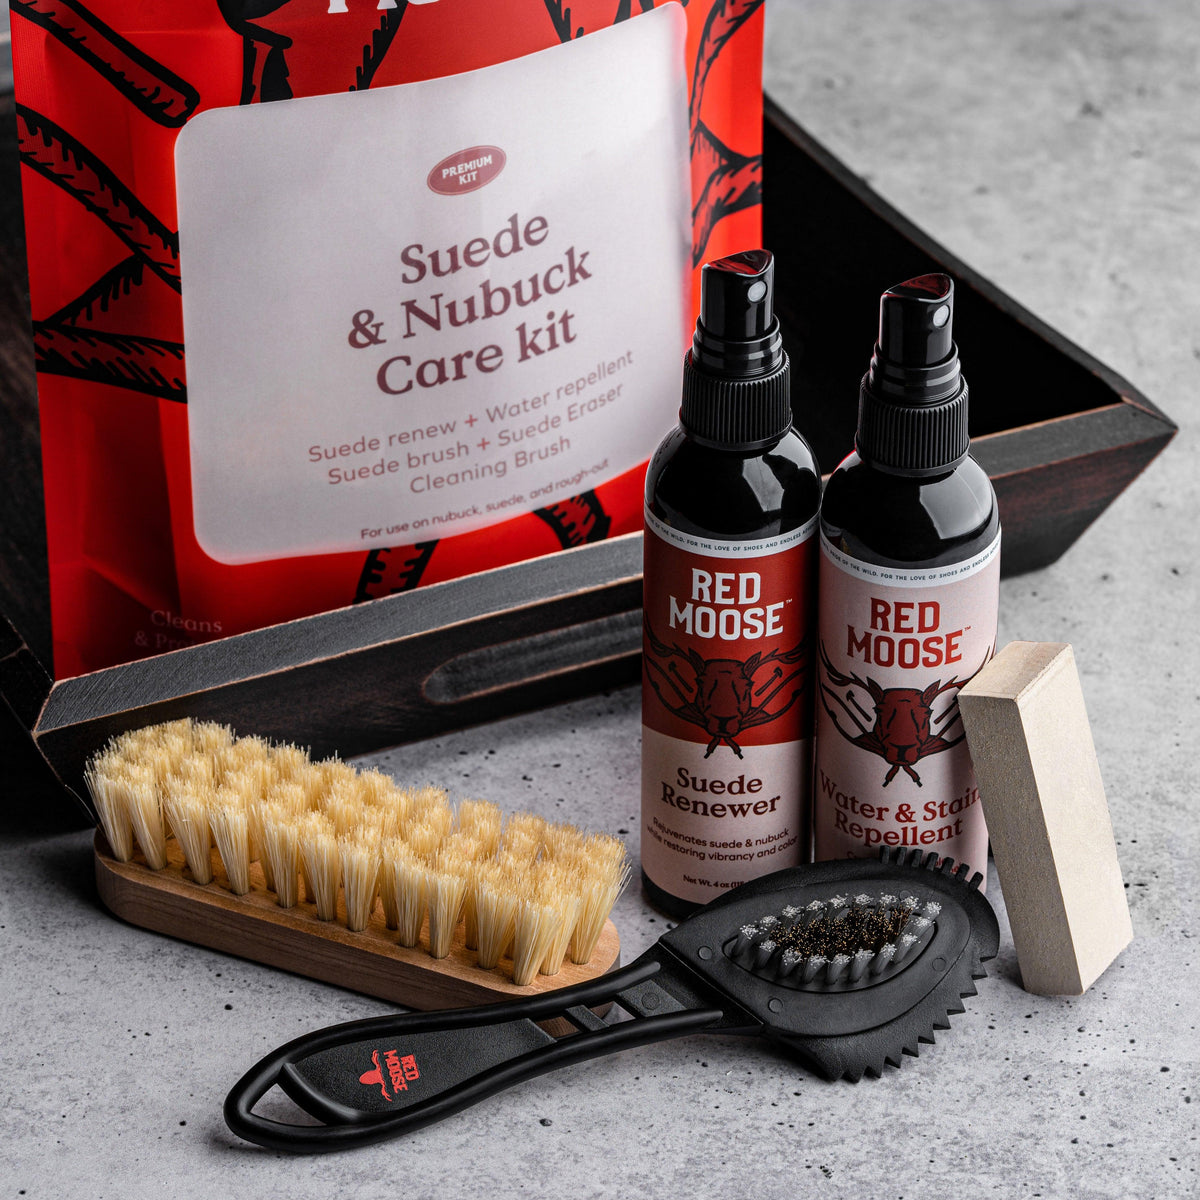 Nubuck and Suede Shoe Cleaner Kit